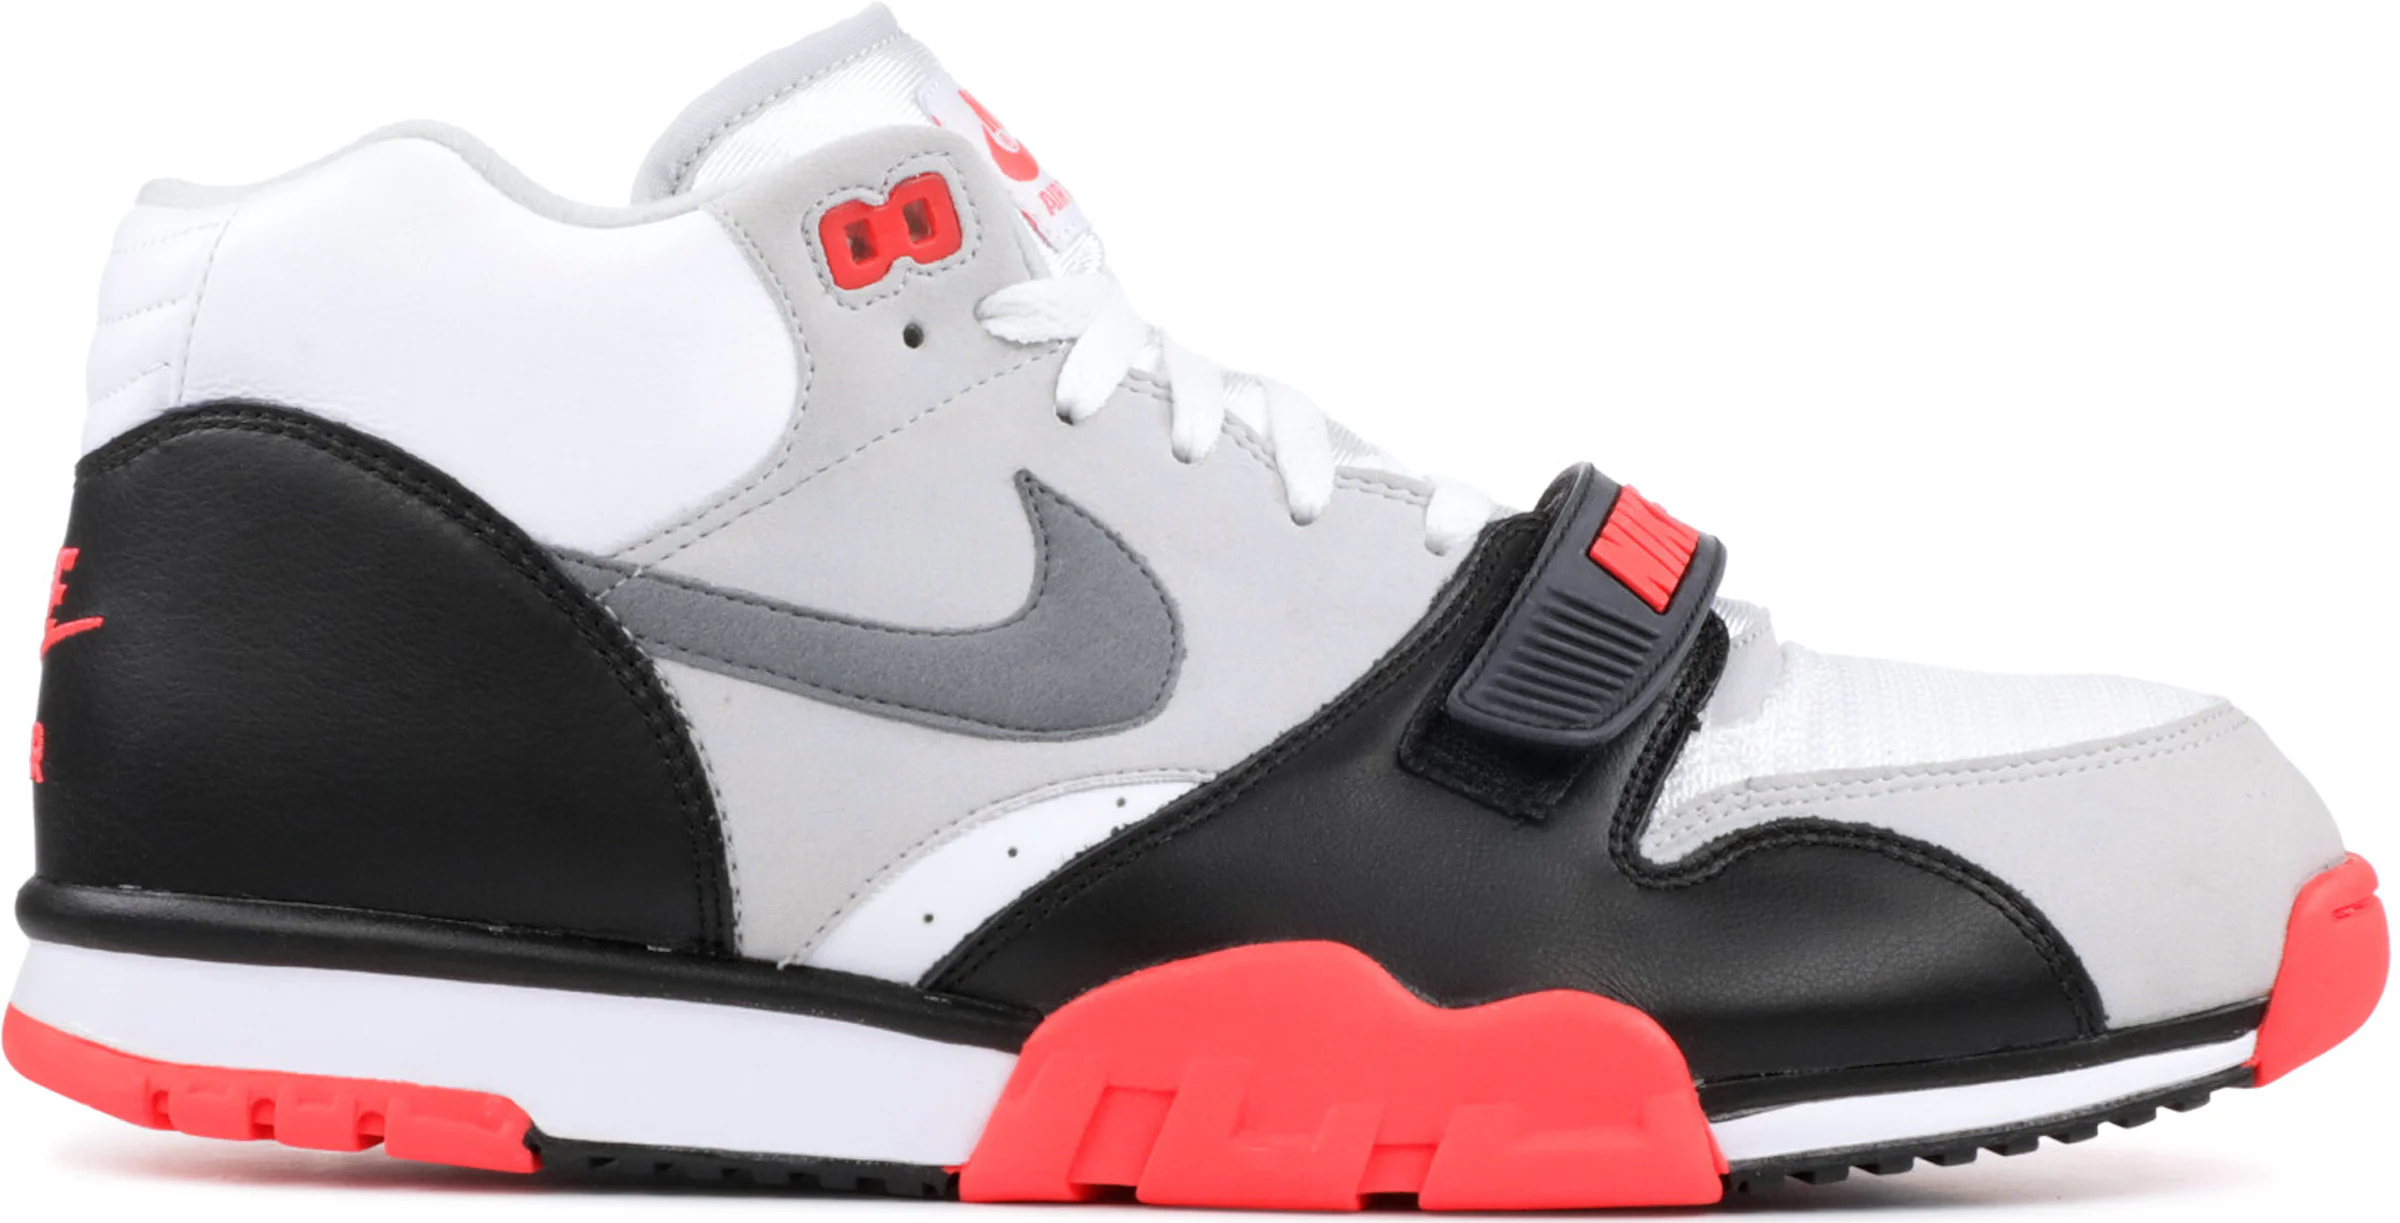 Nike Air Trainer 1 Mid Infrared Men's - 607081-100 - US